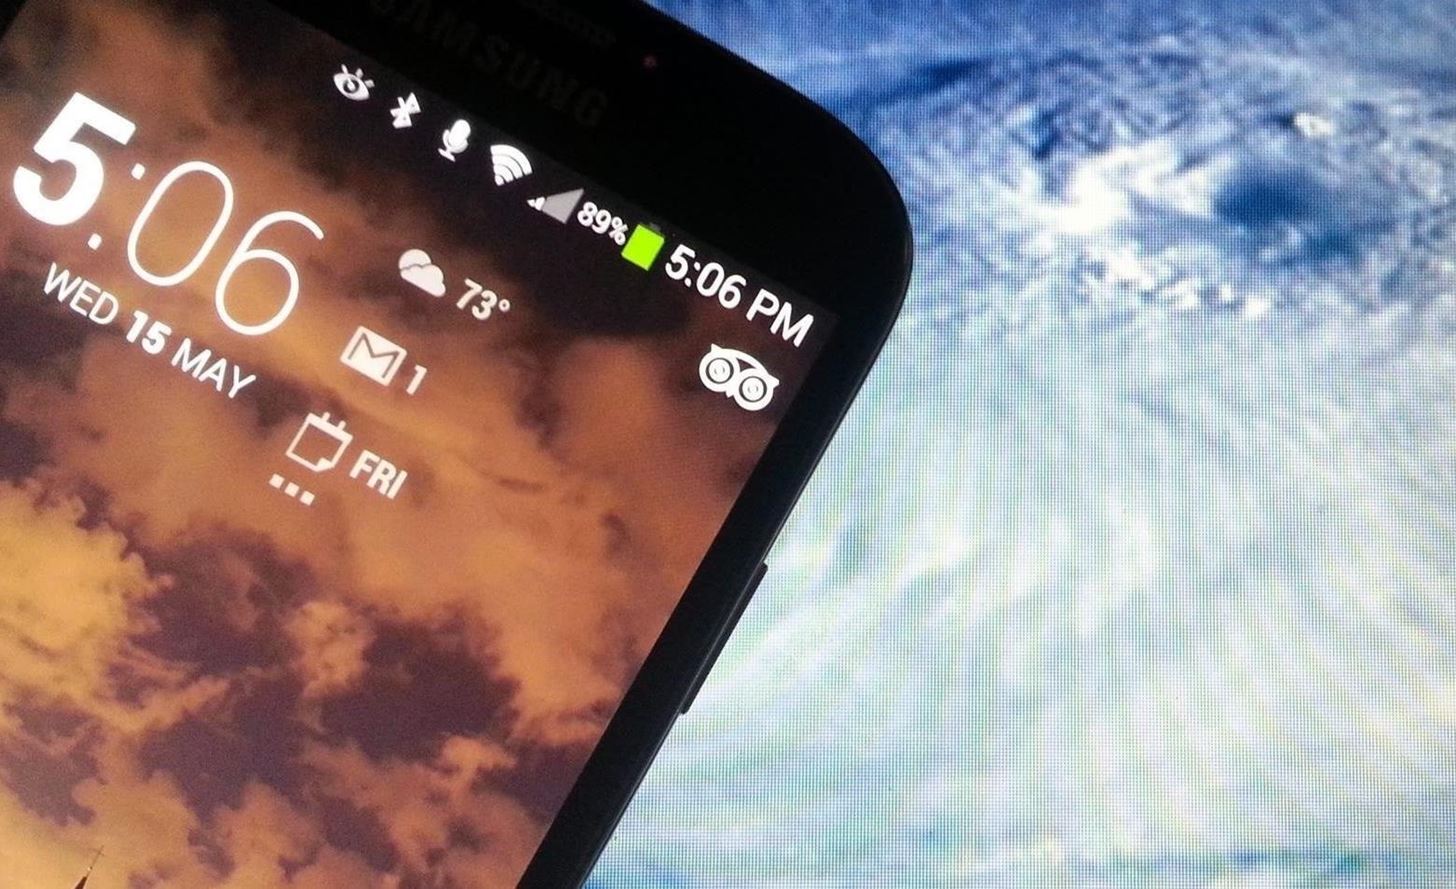 A softModder's Review of the Samsung Galaxy S4: "Best Android Phone on the Market"